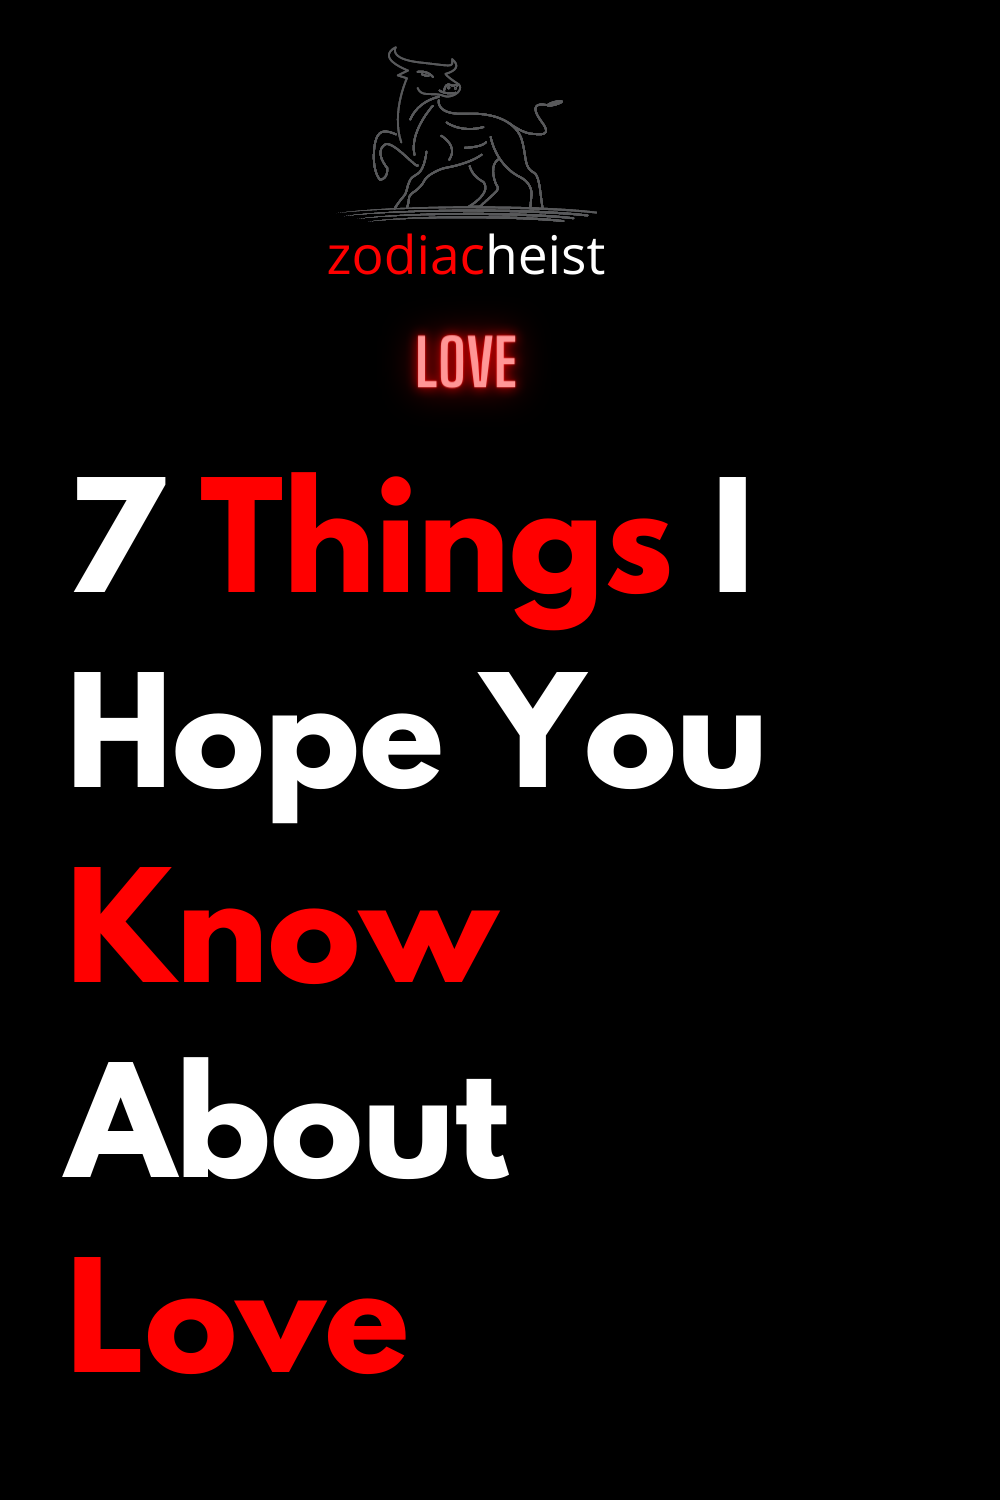 7 Things I Hope You Know About Love